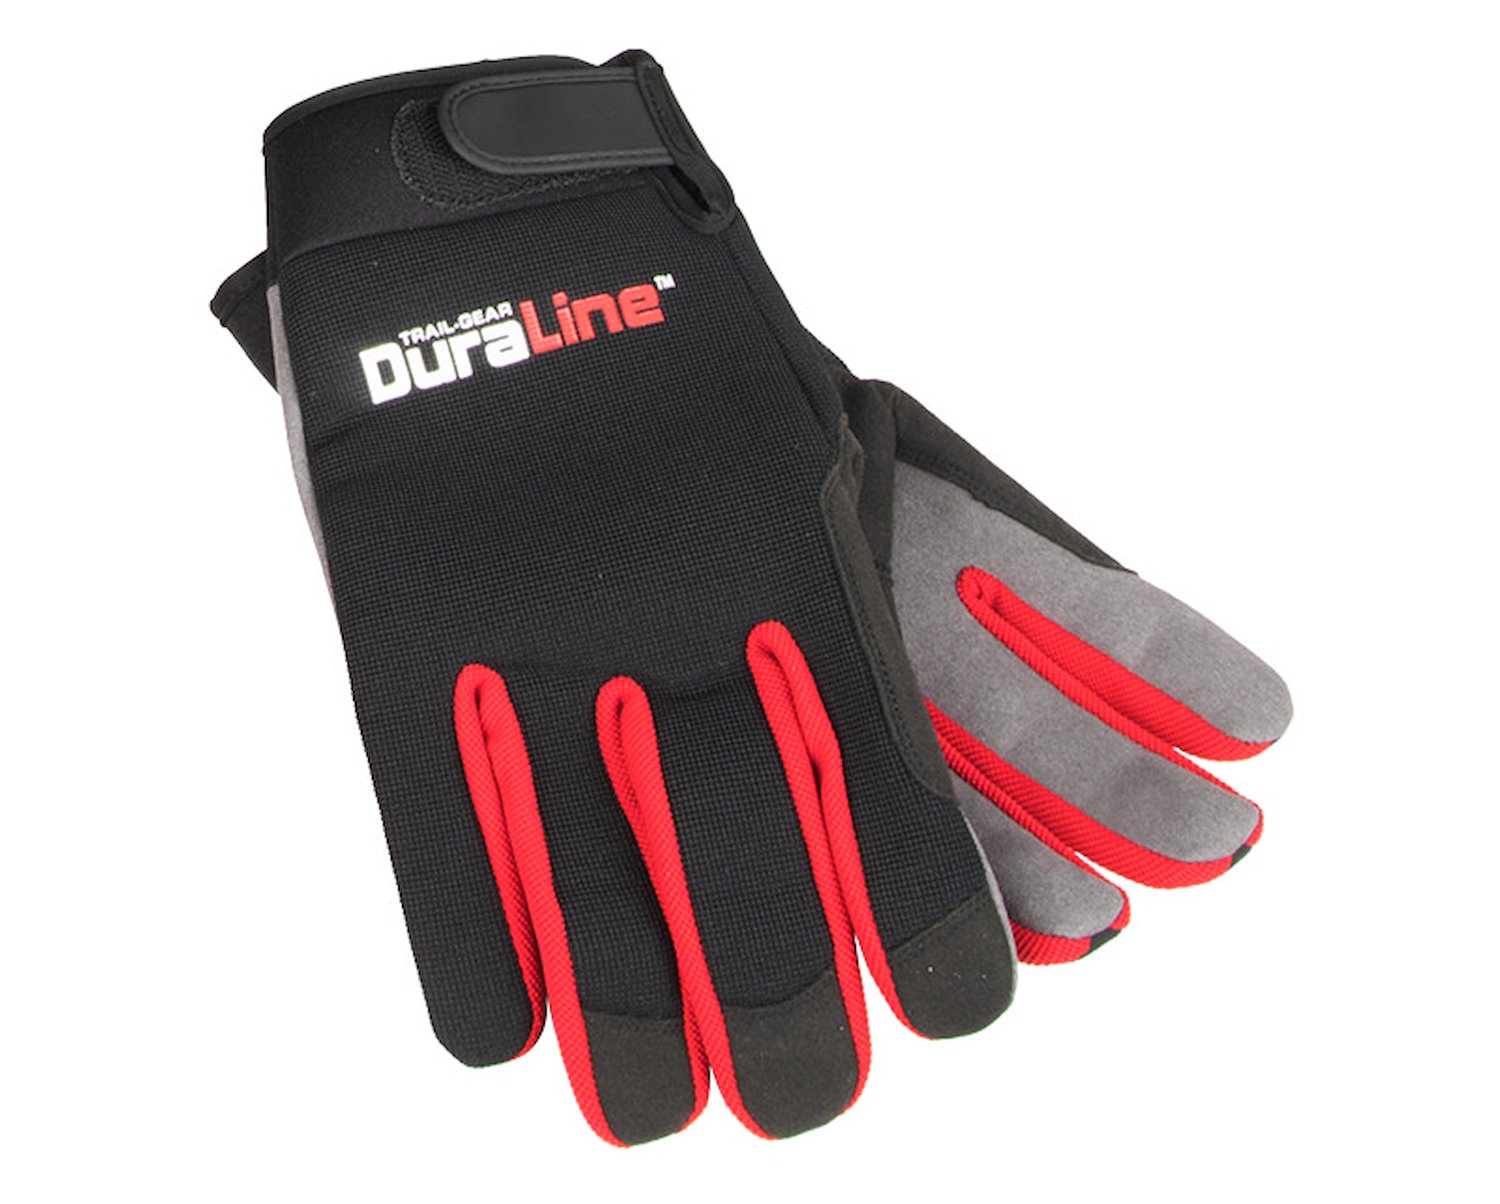 DURALINE RECOVERY GLOVES